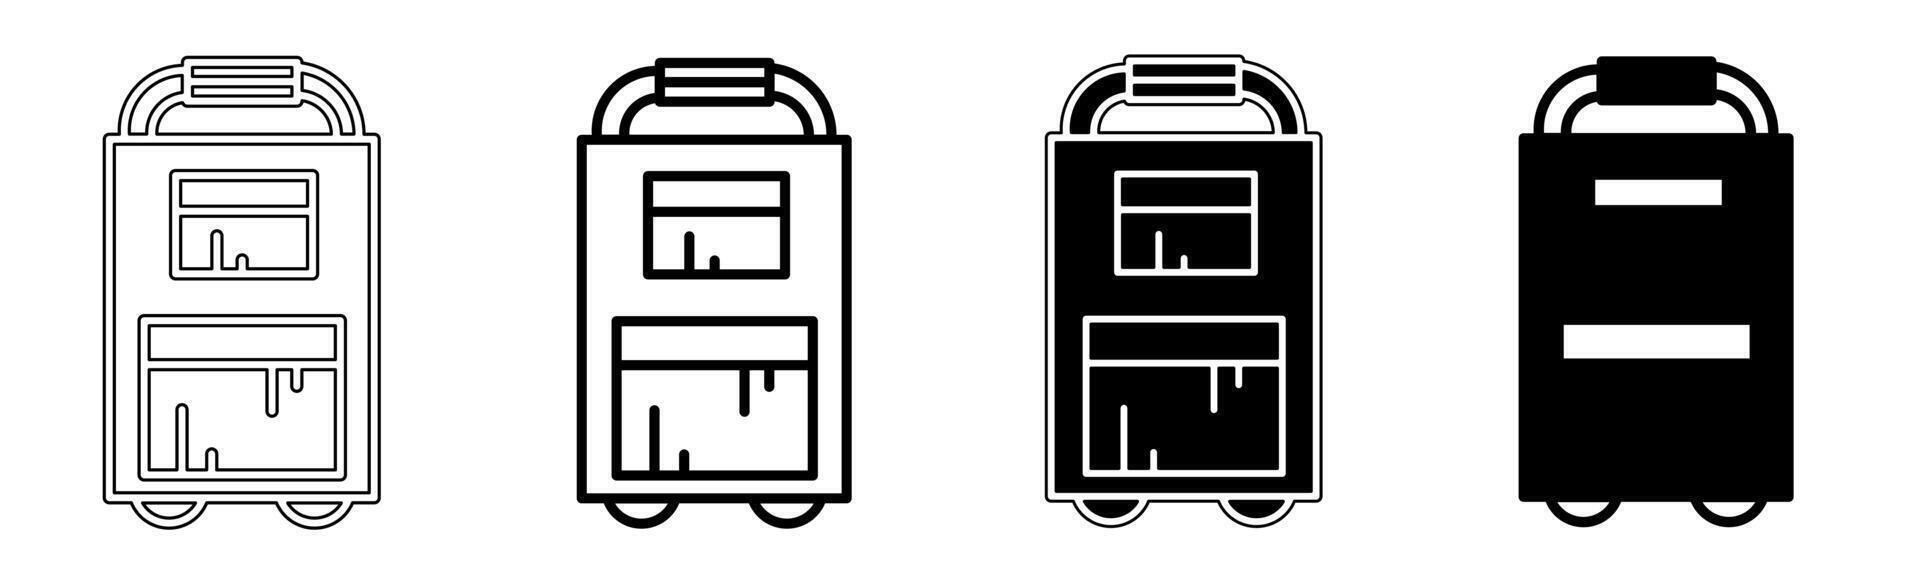 Black and white illustration of a suutcase. Suutcase icon collection with line. Stock vector illustration.